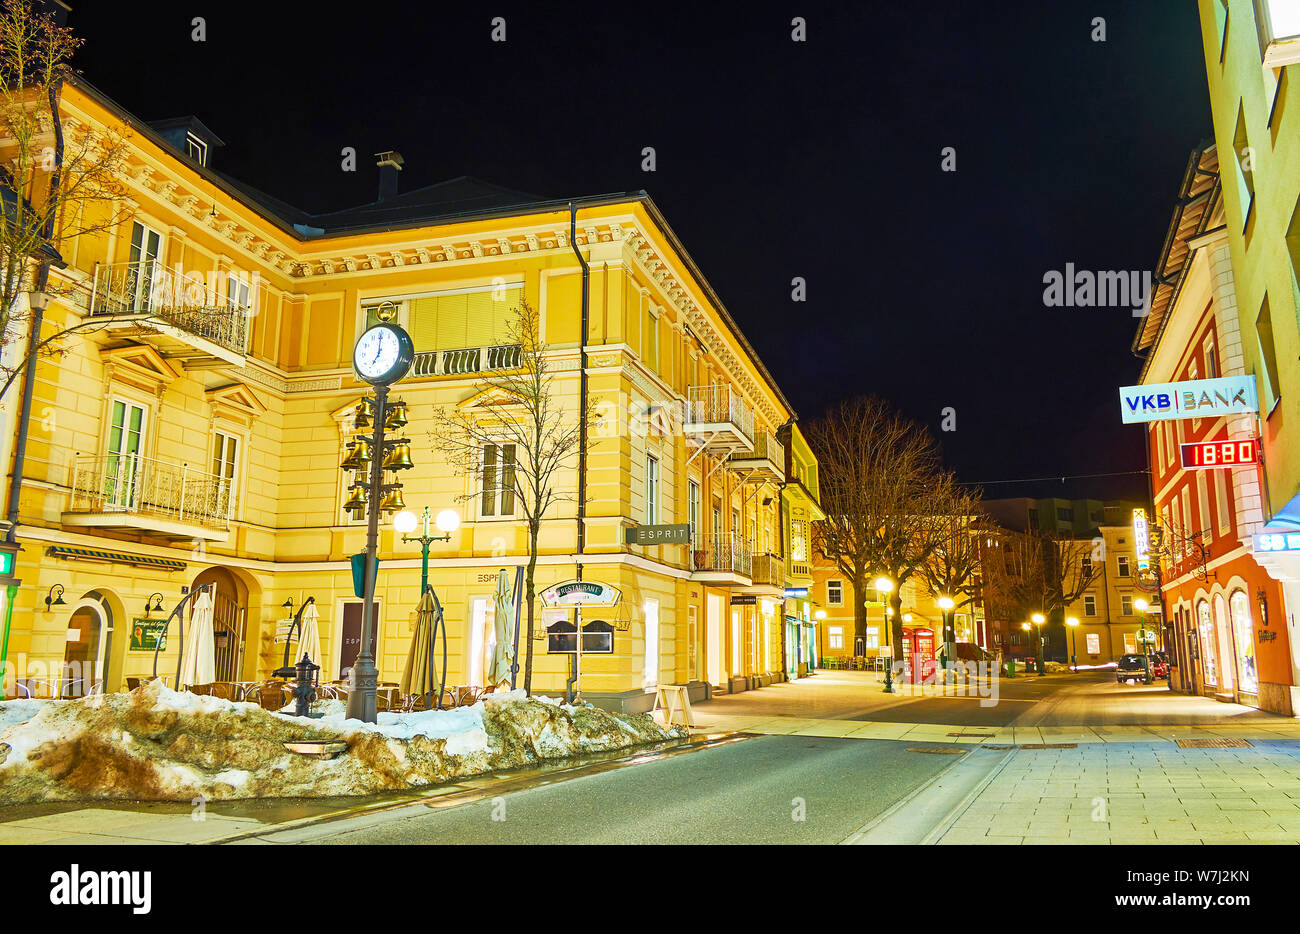 BAD ISCHL, AUSTRIA - FEBRUARY 26, 2019: The Kreuzplatz square looks great in the evening, its historical buildings are brightly illuminated and attrac Stock Photo